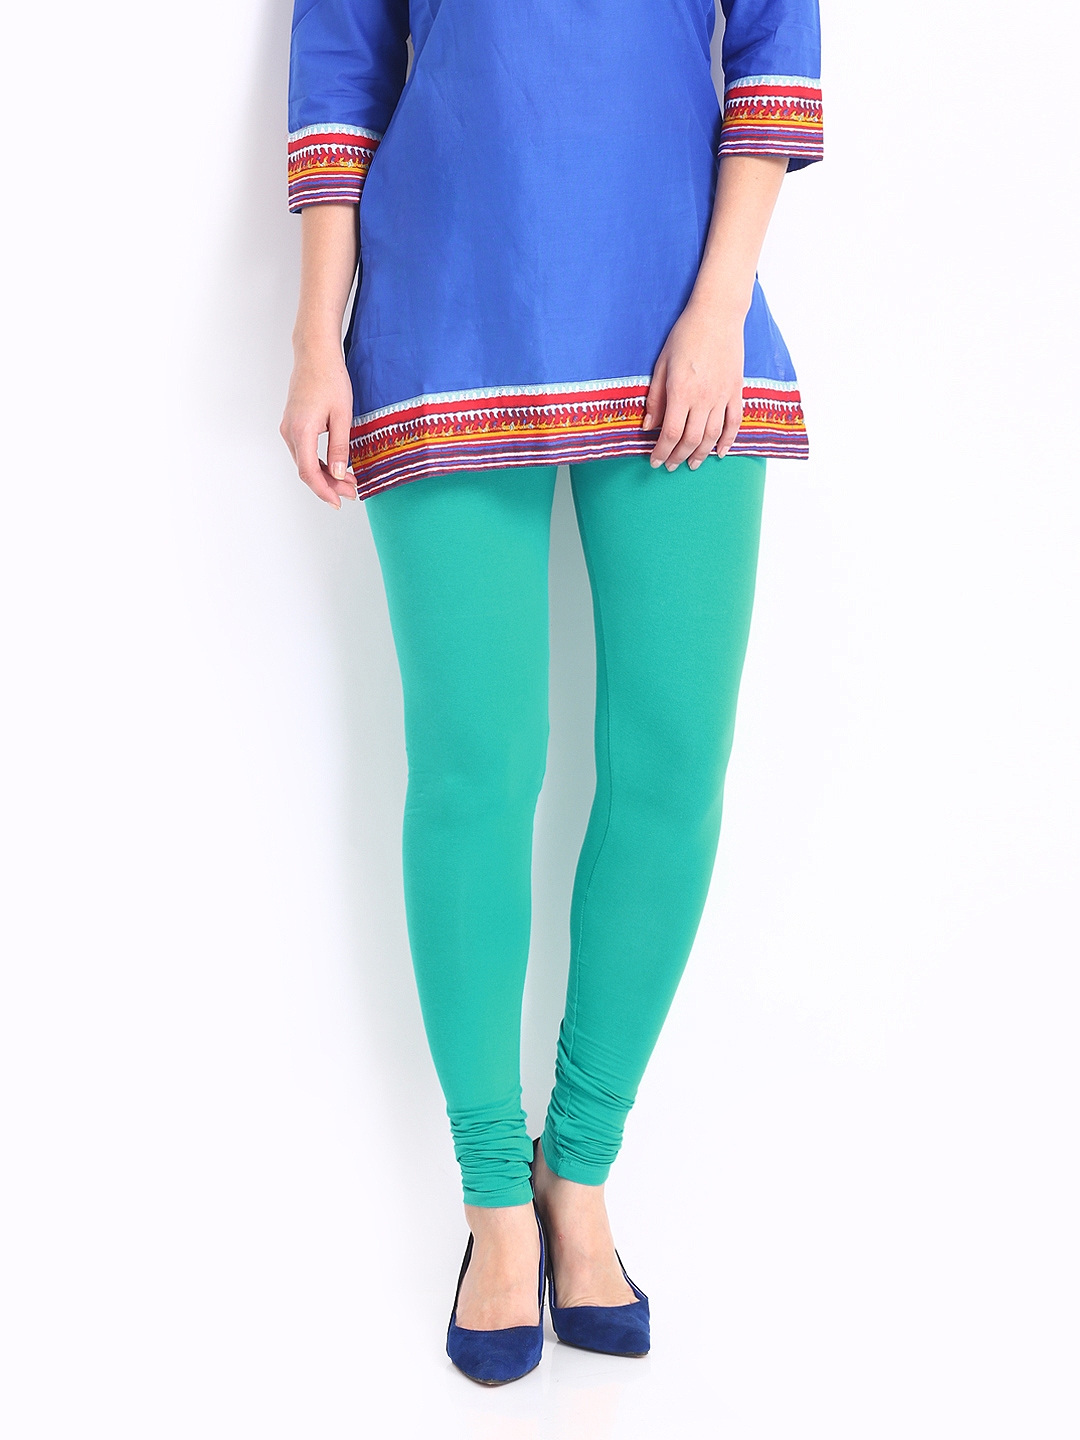 Leggings & Churidars in the color blue for Women on sale